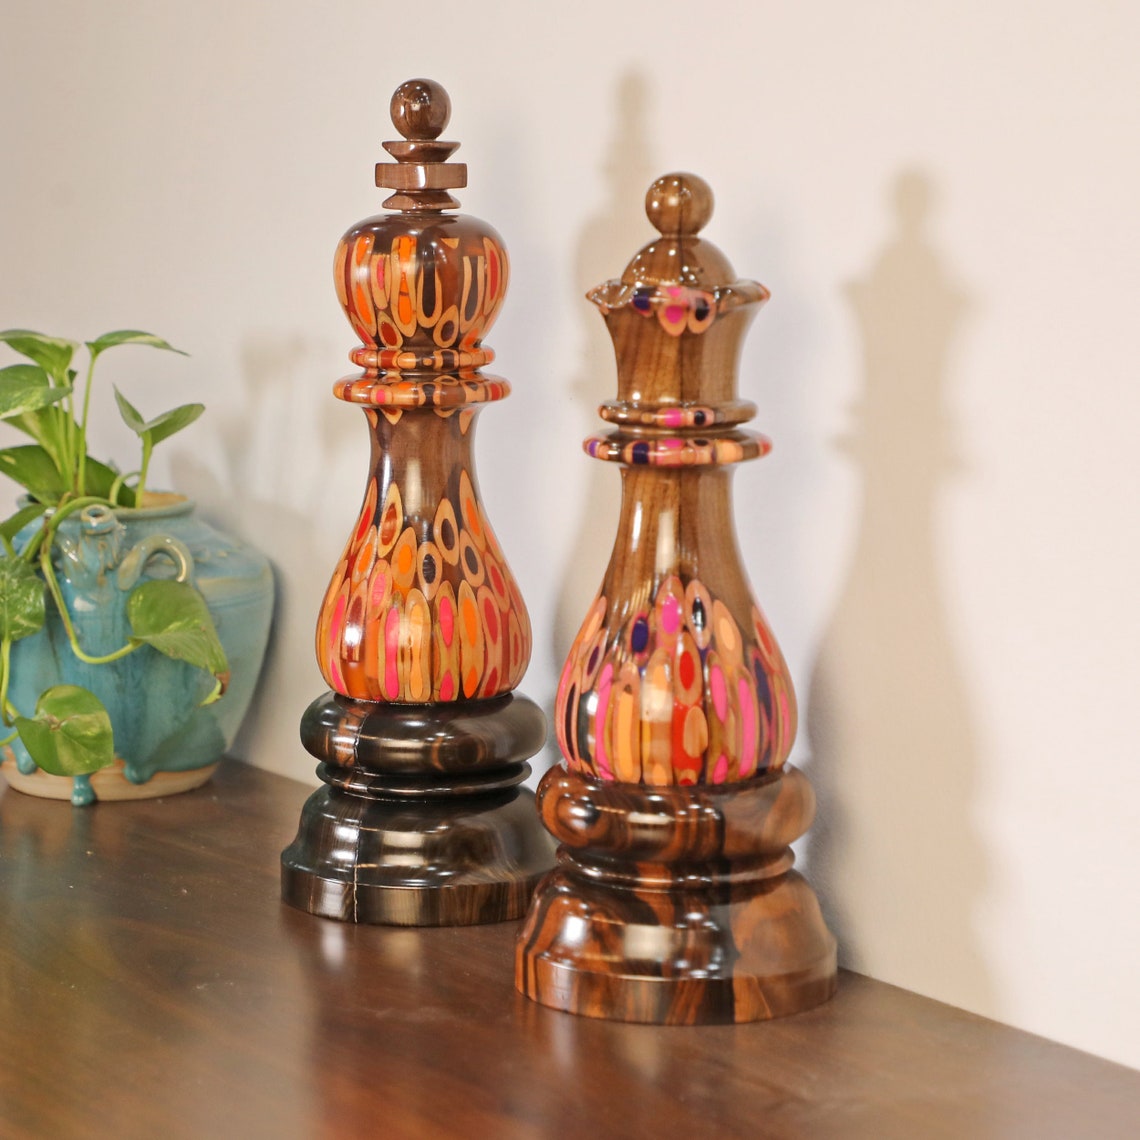 Deluxe Decorative King & Queen Chess Pieces (1)